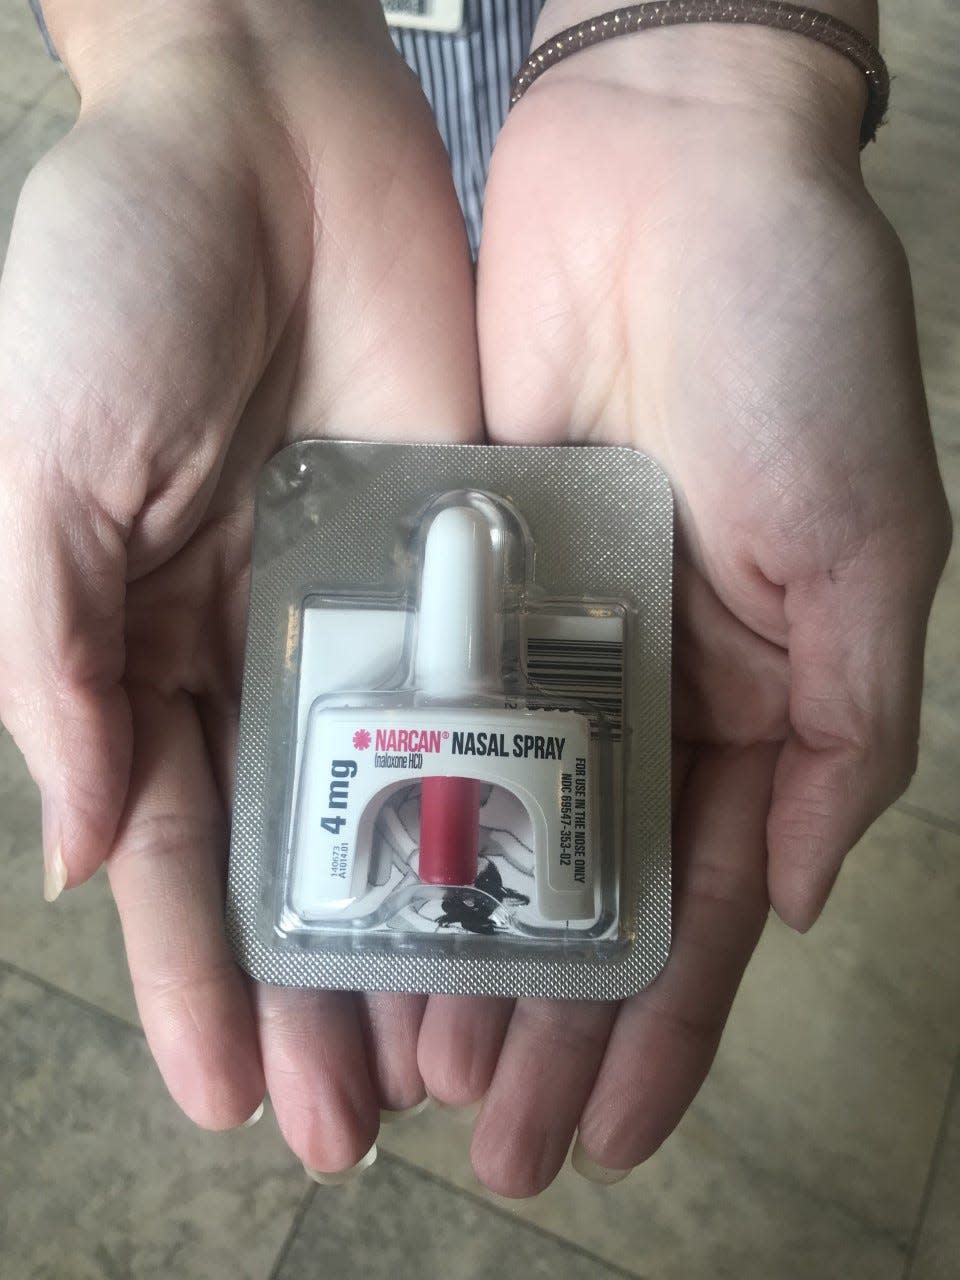 Naloxone nasal spray can treat overdoses from prescription opioids, fentanyl and heroin. It can reverse an overdose, saving someone's life.